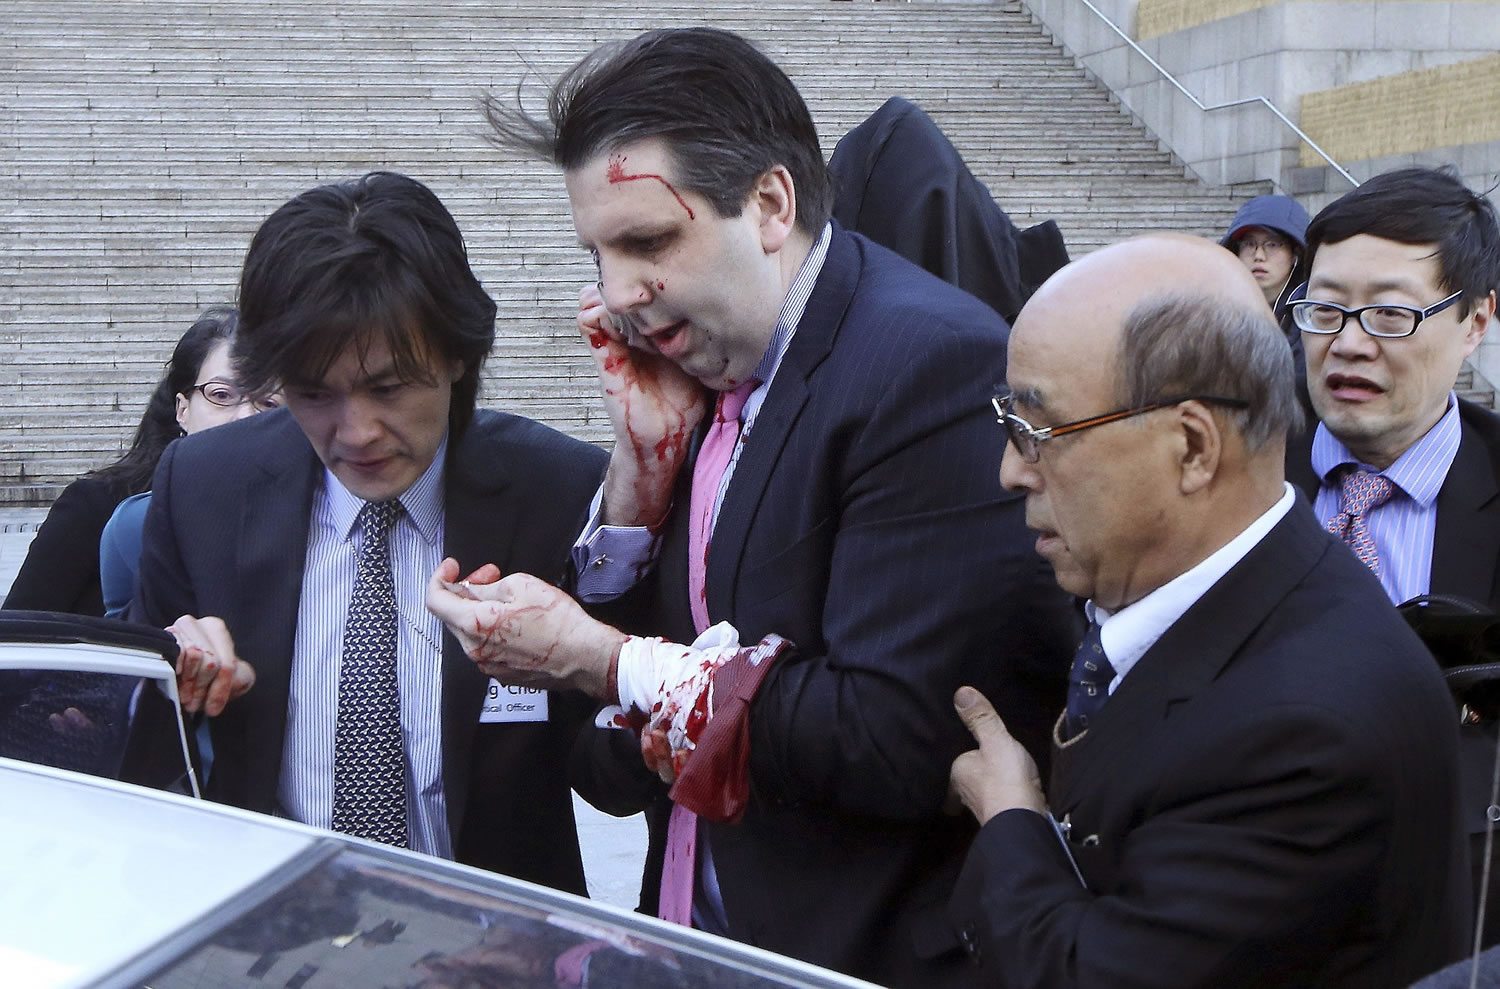 U.S. Ambassador to South Korea Mark Lippert, center, gets into a car to leave for a hospital in Seoul, South Korea, Thursday, March 5, 2015 after being attacked by a man. Lippert was slashed on the face and wrist by a man wielding a blade and screaming that the rival Koreas should be unified, South Korean police said Thursday.